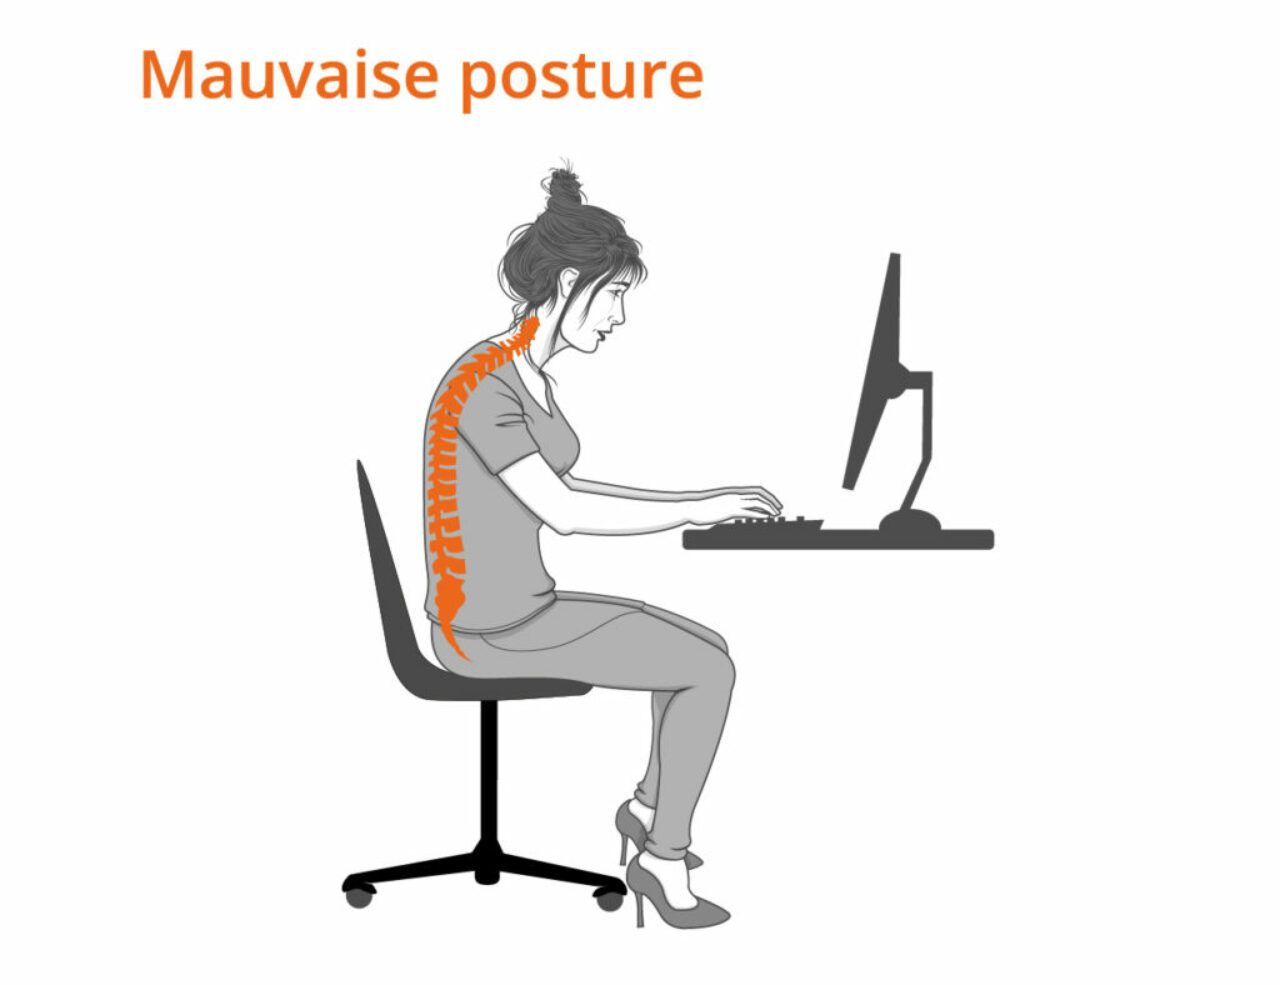 Illustration of poor sitting posture, which distorts the spine and exacerbates back pain